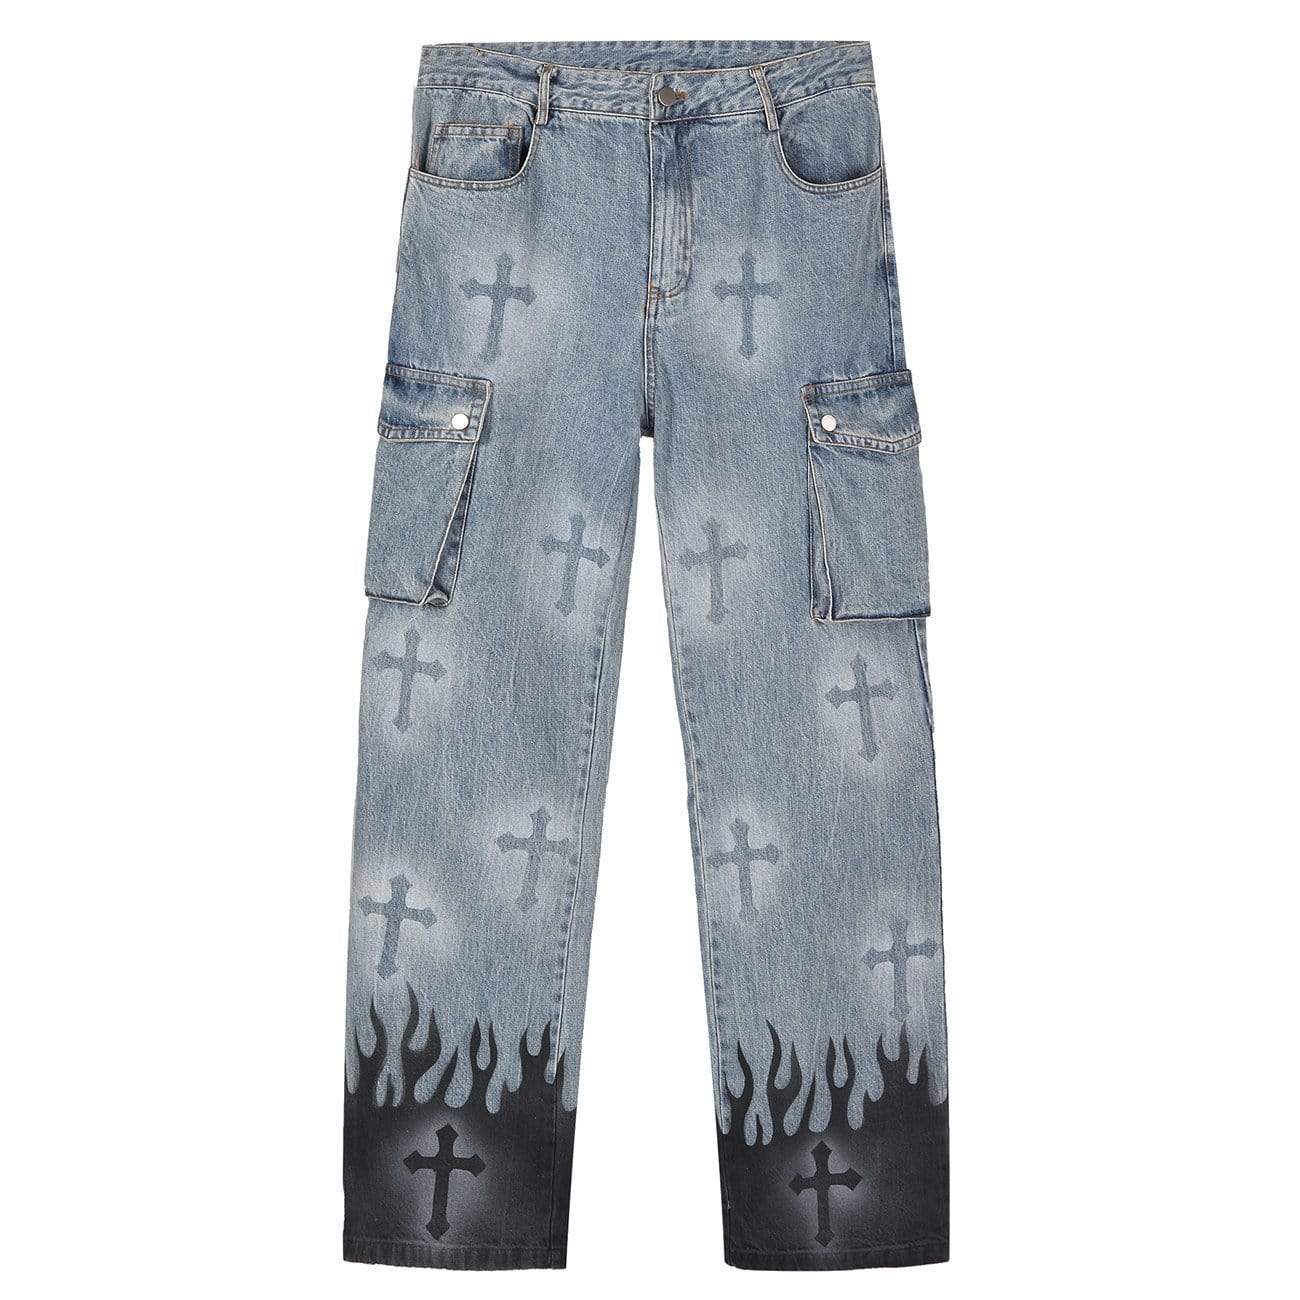 TO Printed Straight Denim Jeans